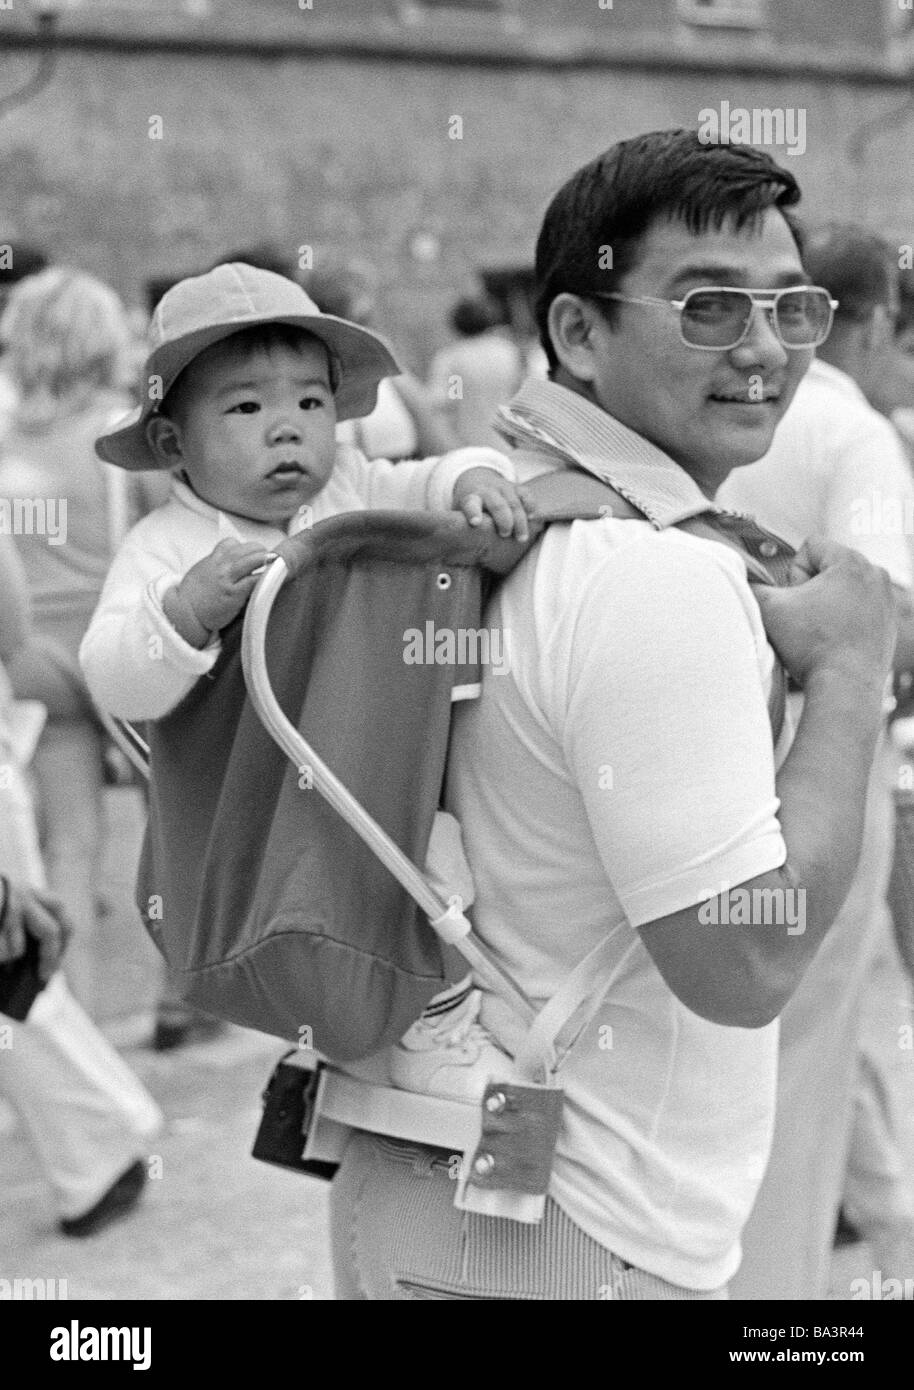 Seventies, black and white photo, people, young father carries the little son on his back in a knapsack, Japanese, tourists, aged 25 to 35 years, aged 1 to 2 years, Austria, Salzburg Stock Photo